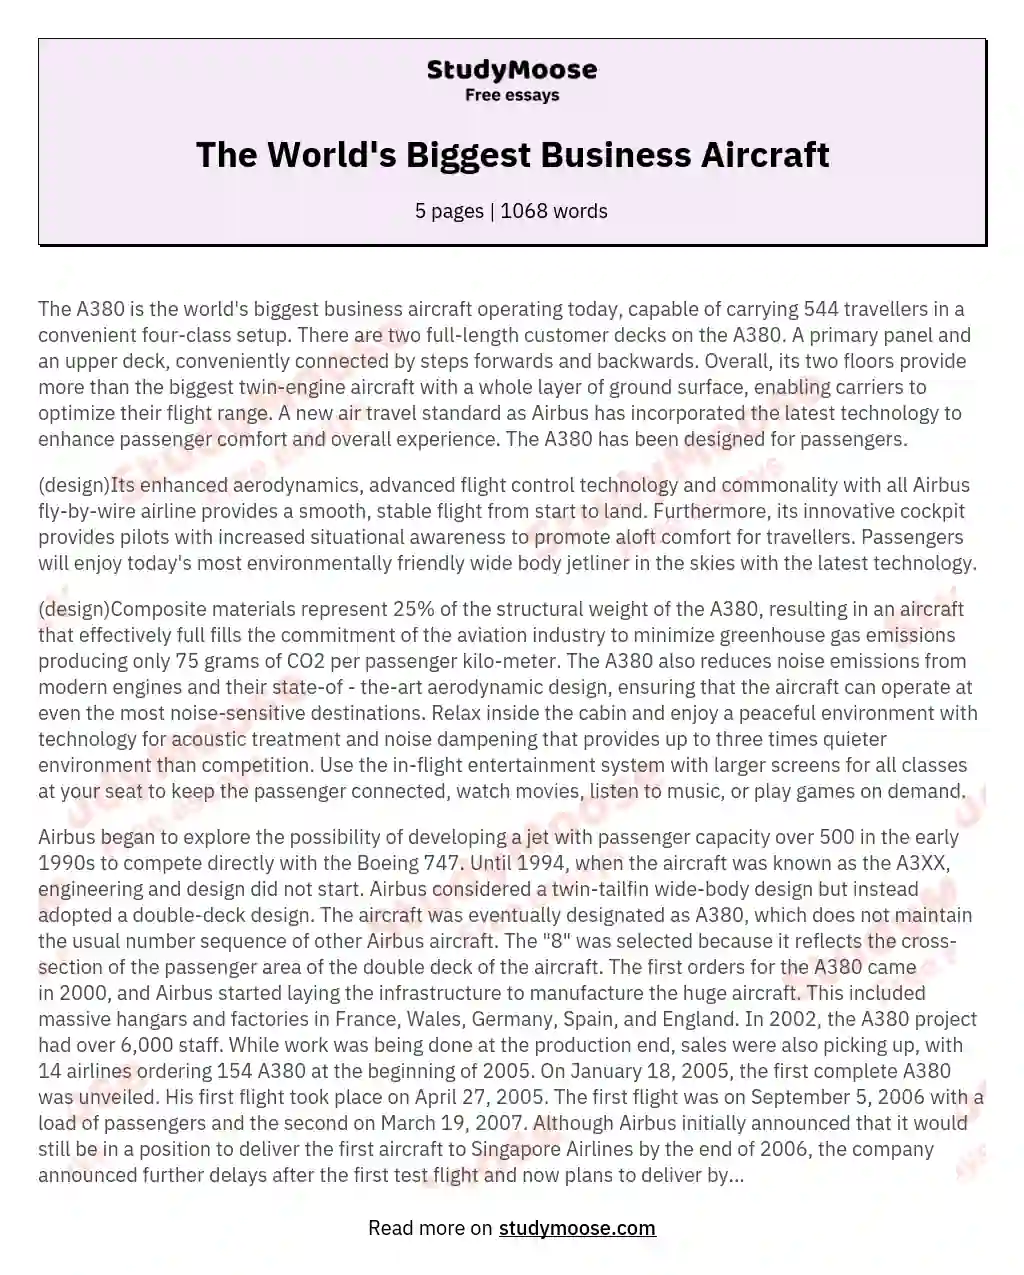 The World's Biggest Business Aircraft essay